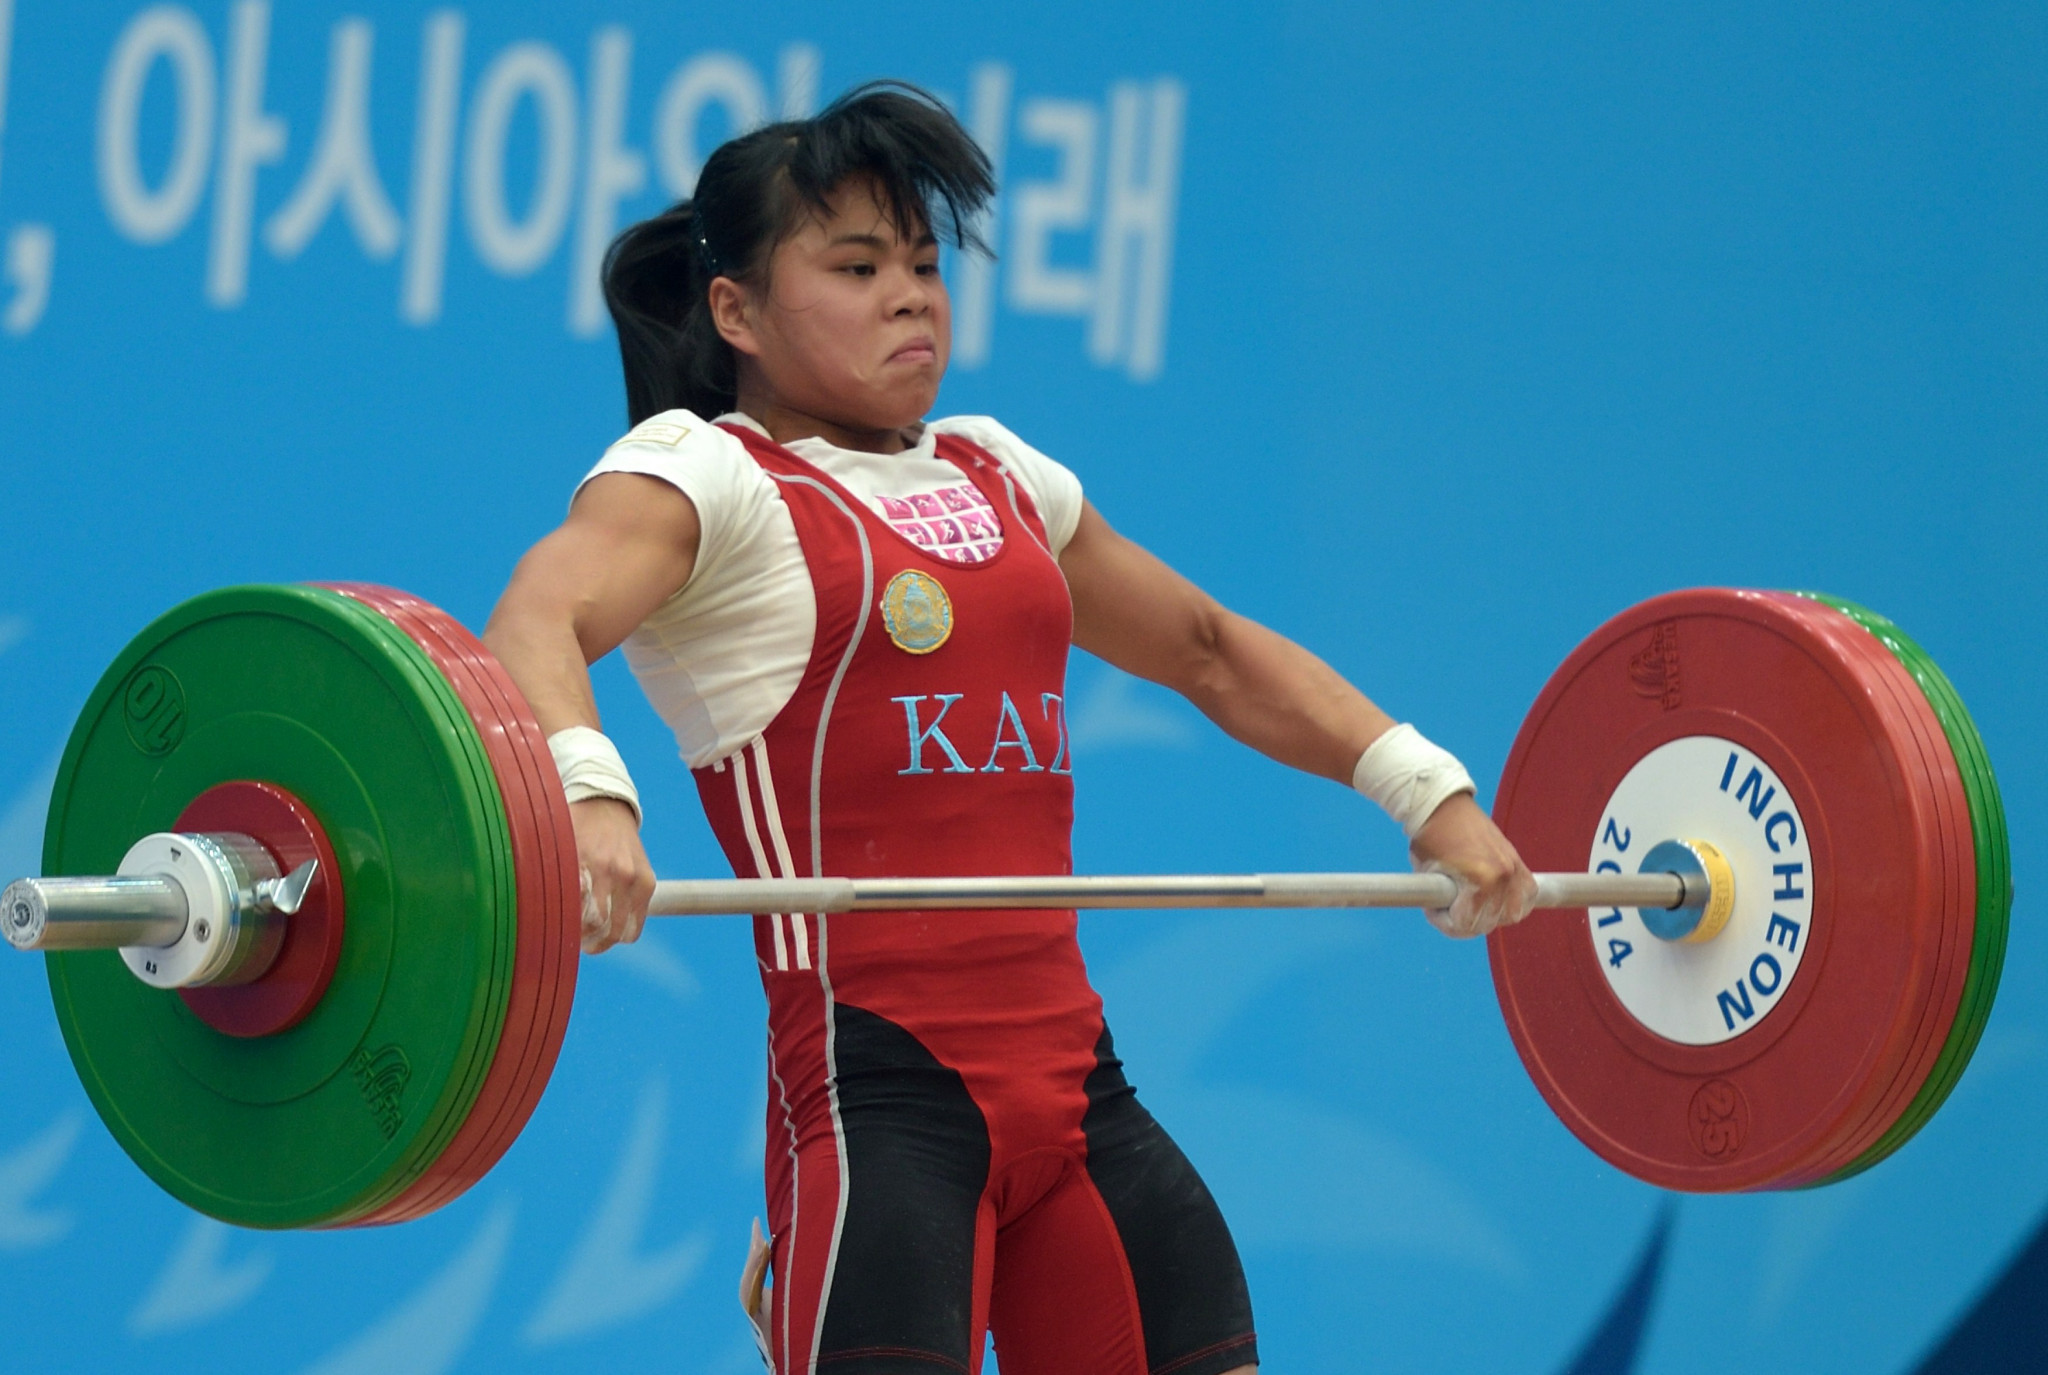 Kazakhstan's Zulfiya Chinshanlo is among the lifters expected to compete ©Getty Images